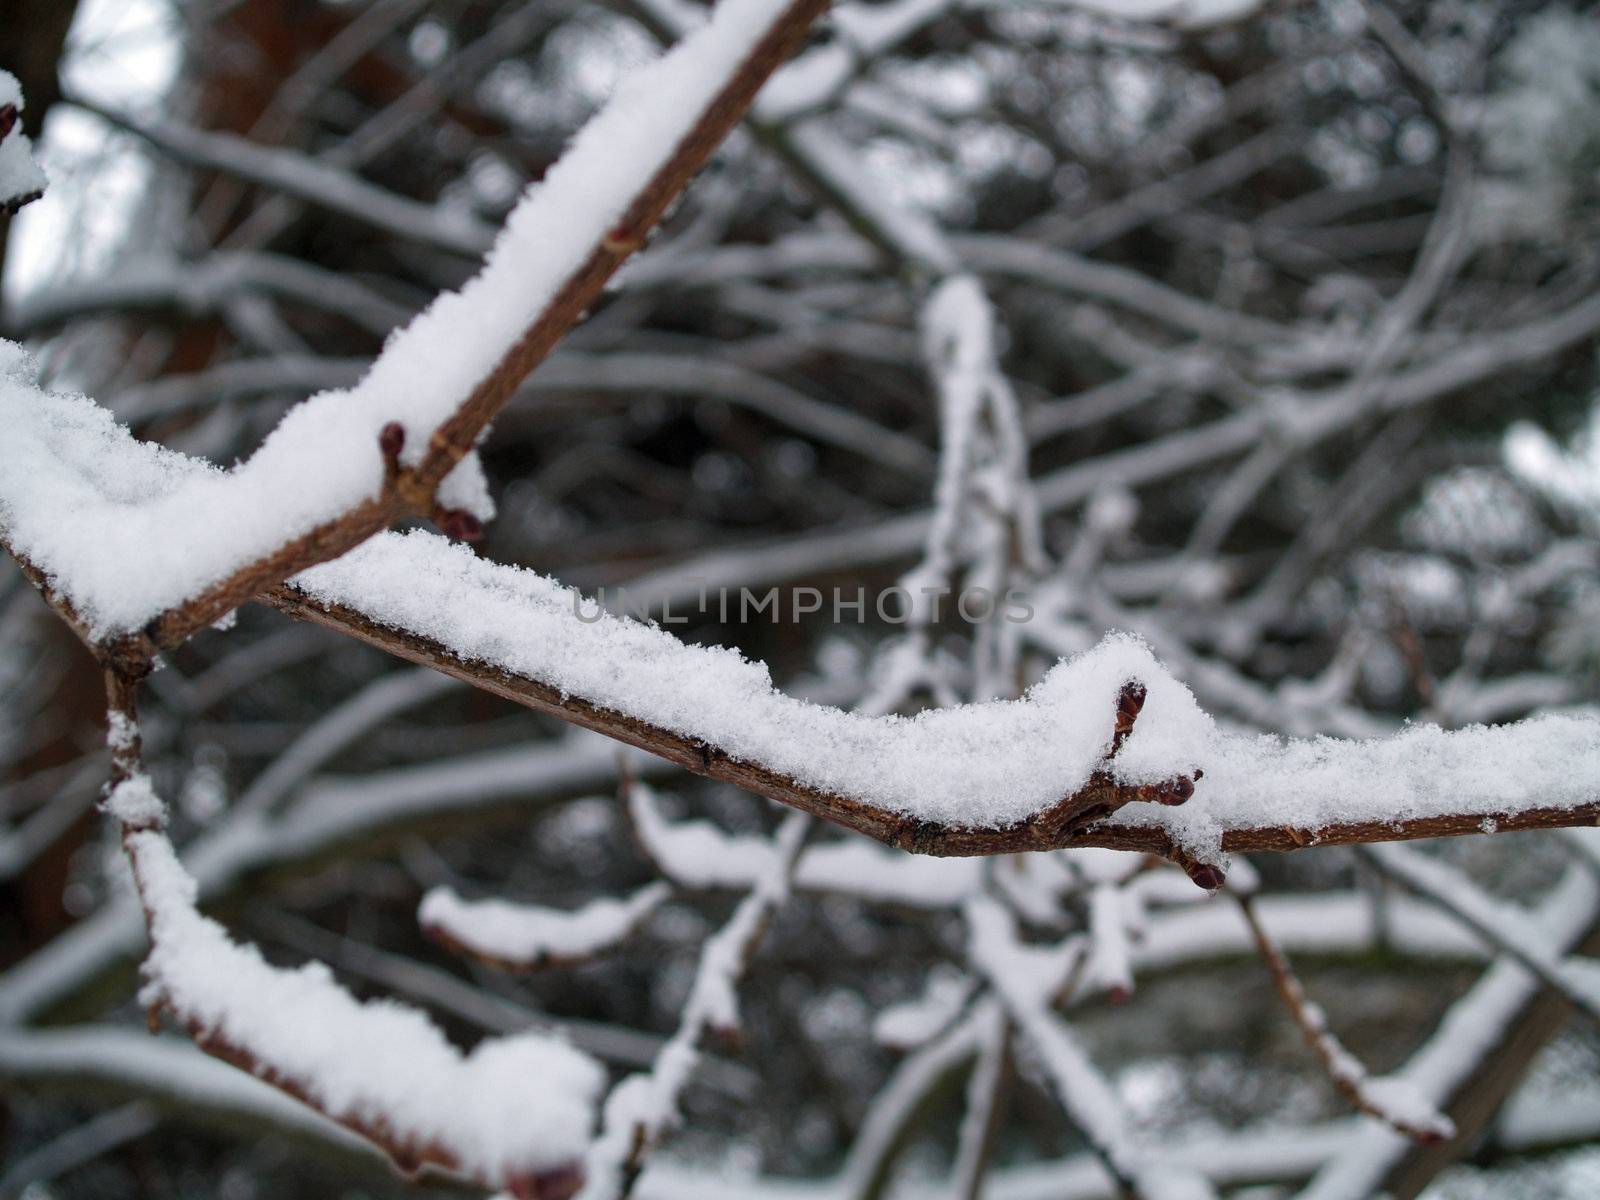 Snow Covered Branches on a Tree After a Snowfall by Frankljunior